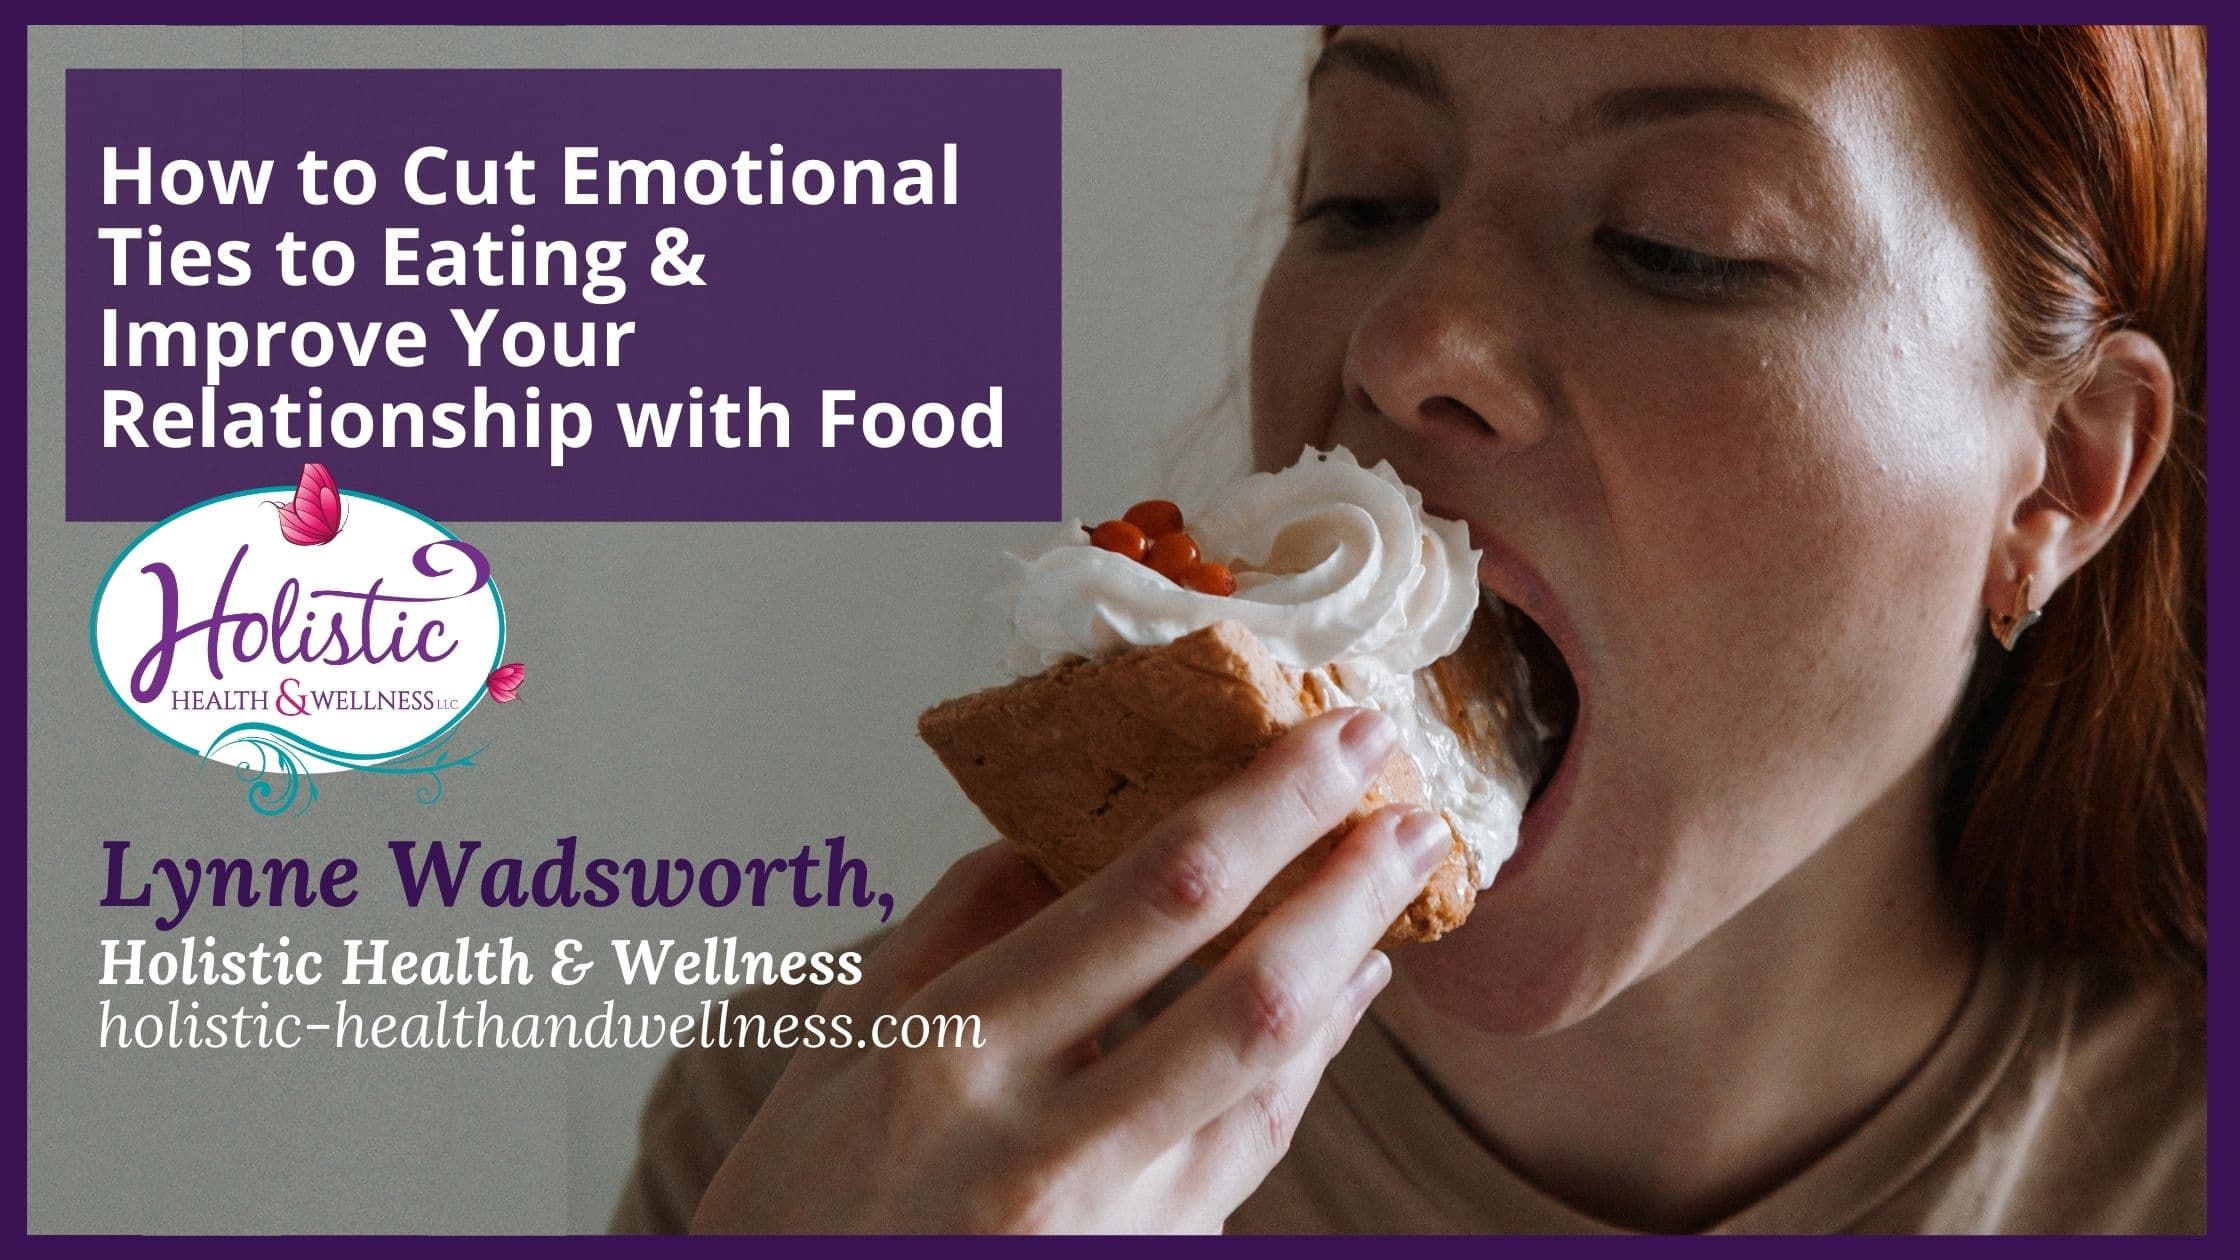 How to Cut Emotional Ties to Eating and Improve Your Relationship with Food